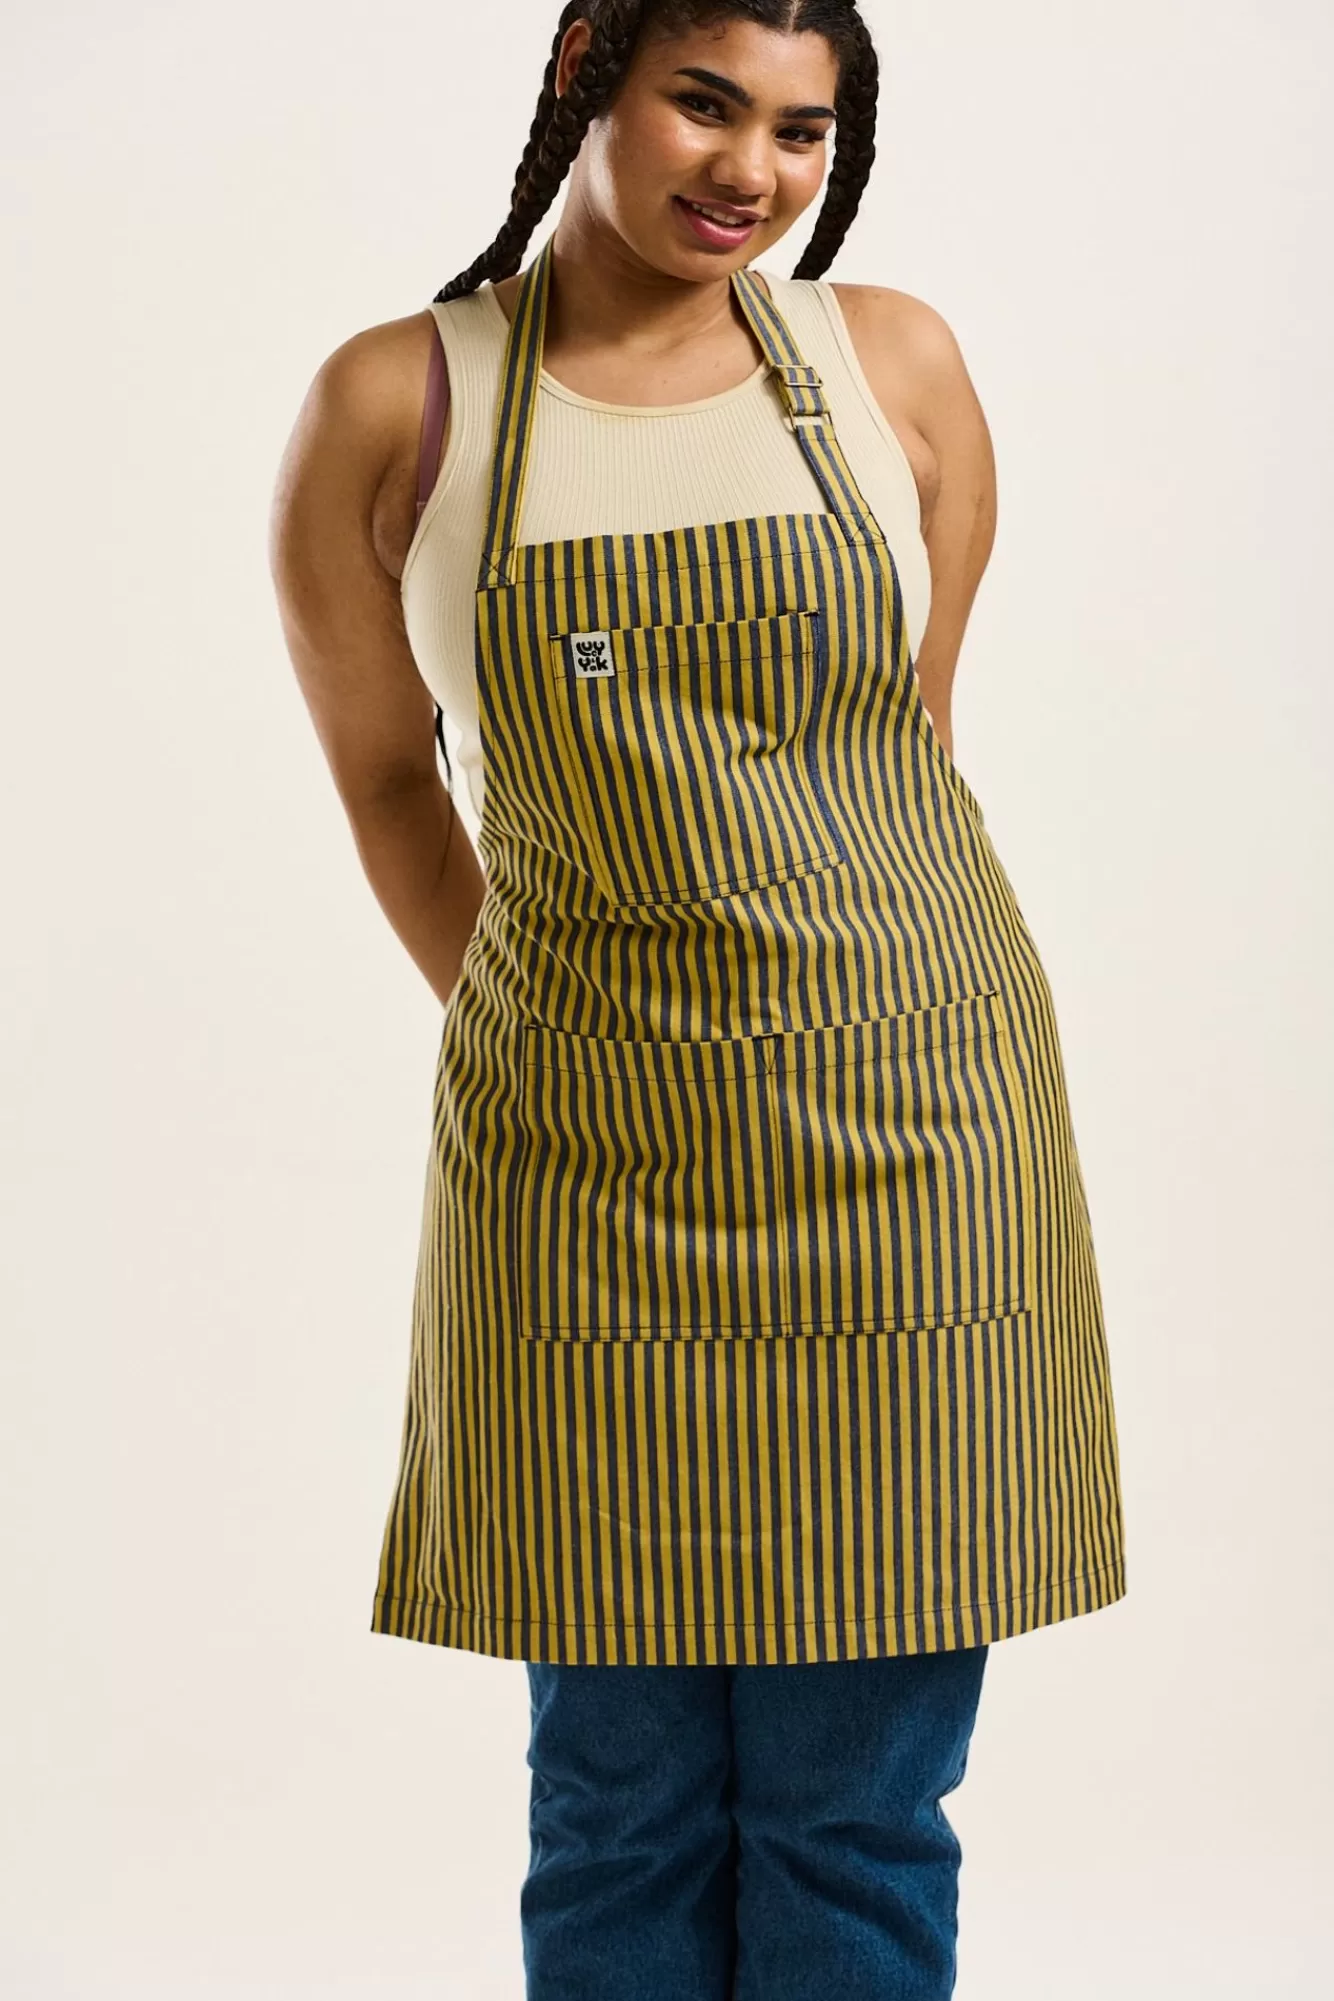 Ada Apron: Deadstock Fabric - Blue & Yellow Stripe-Lucy & Yak Outlet